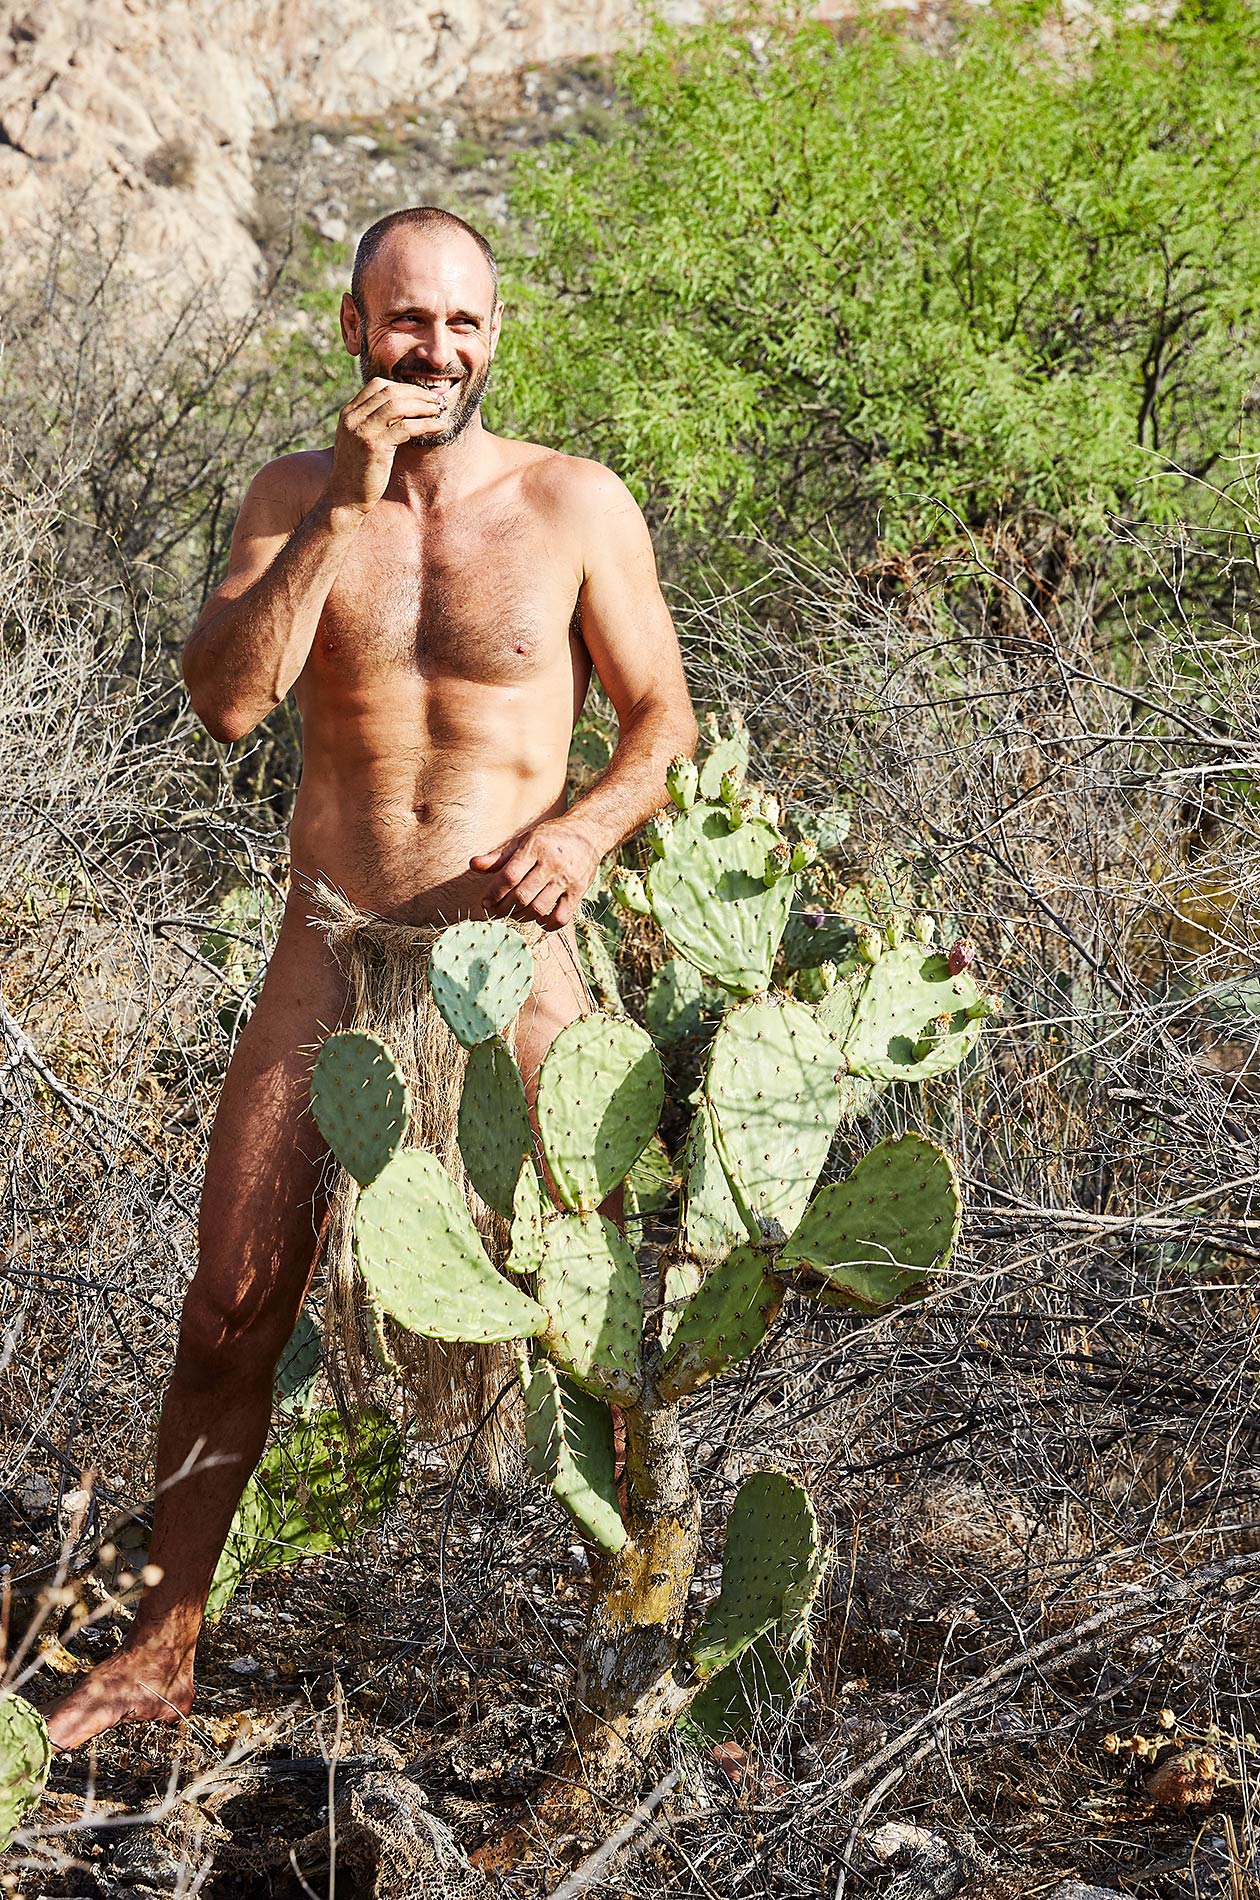 Ed Stafford Prickly Pear - Steve Craft Photography, Phoenix, Arizona based Commercial, Corporate & Advertising Photographer